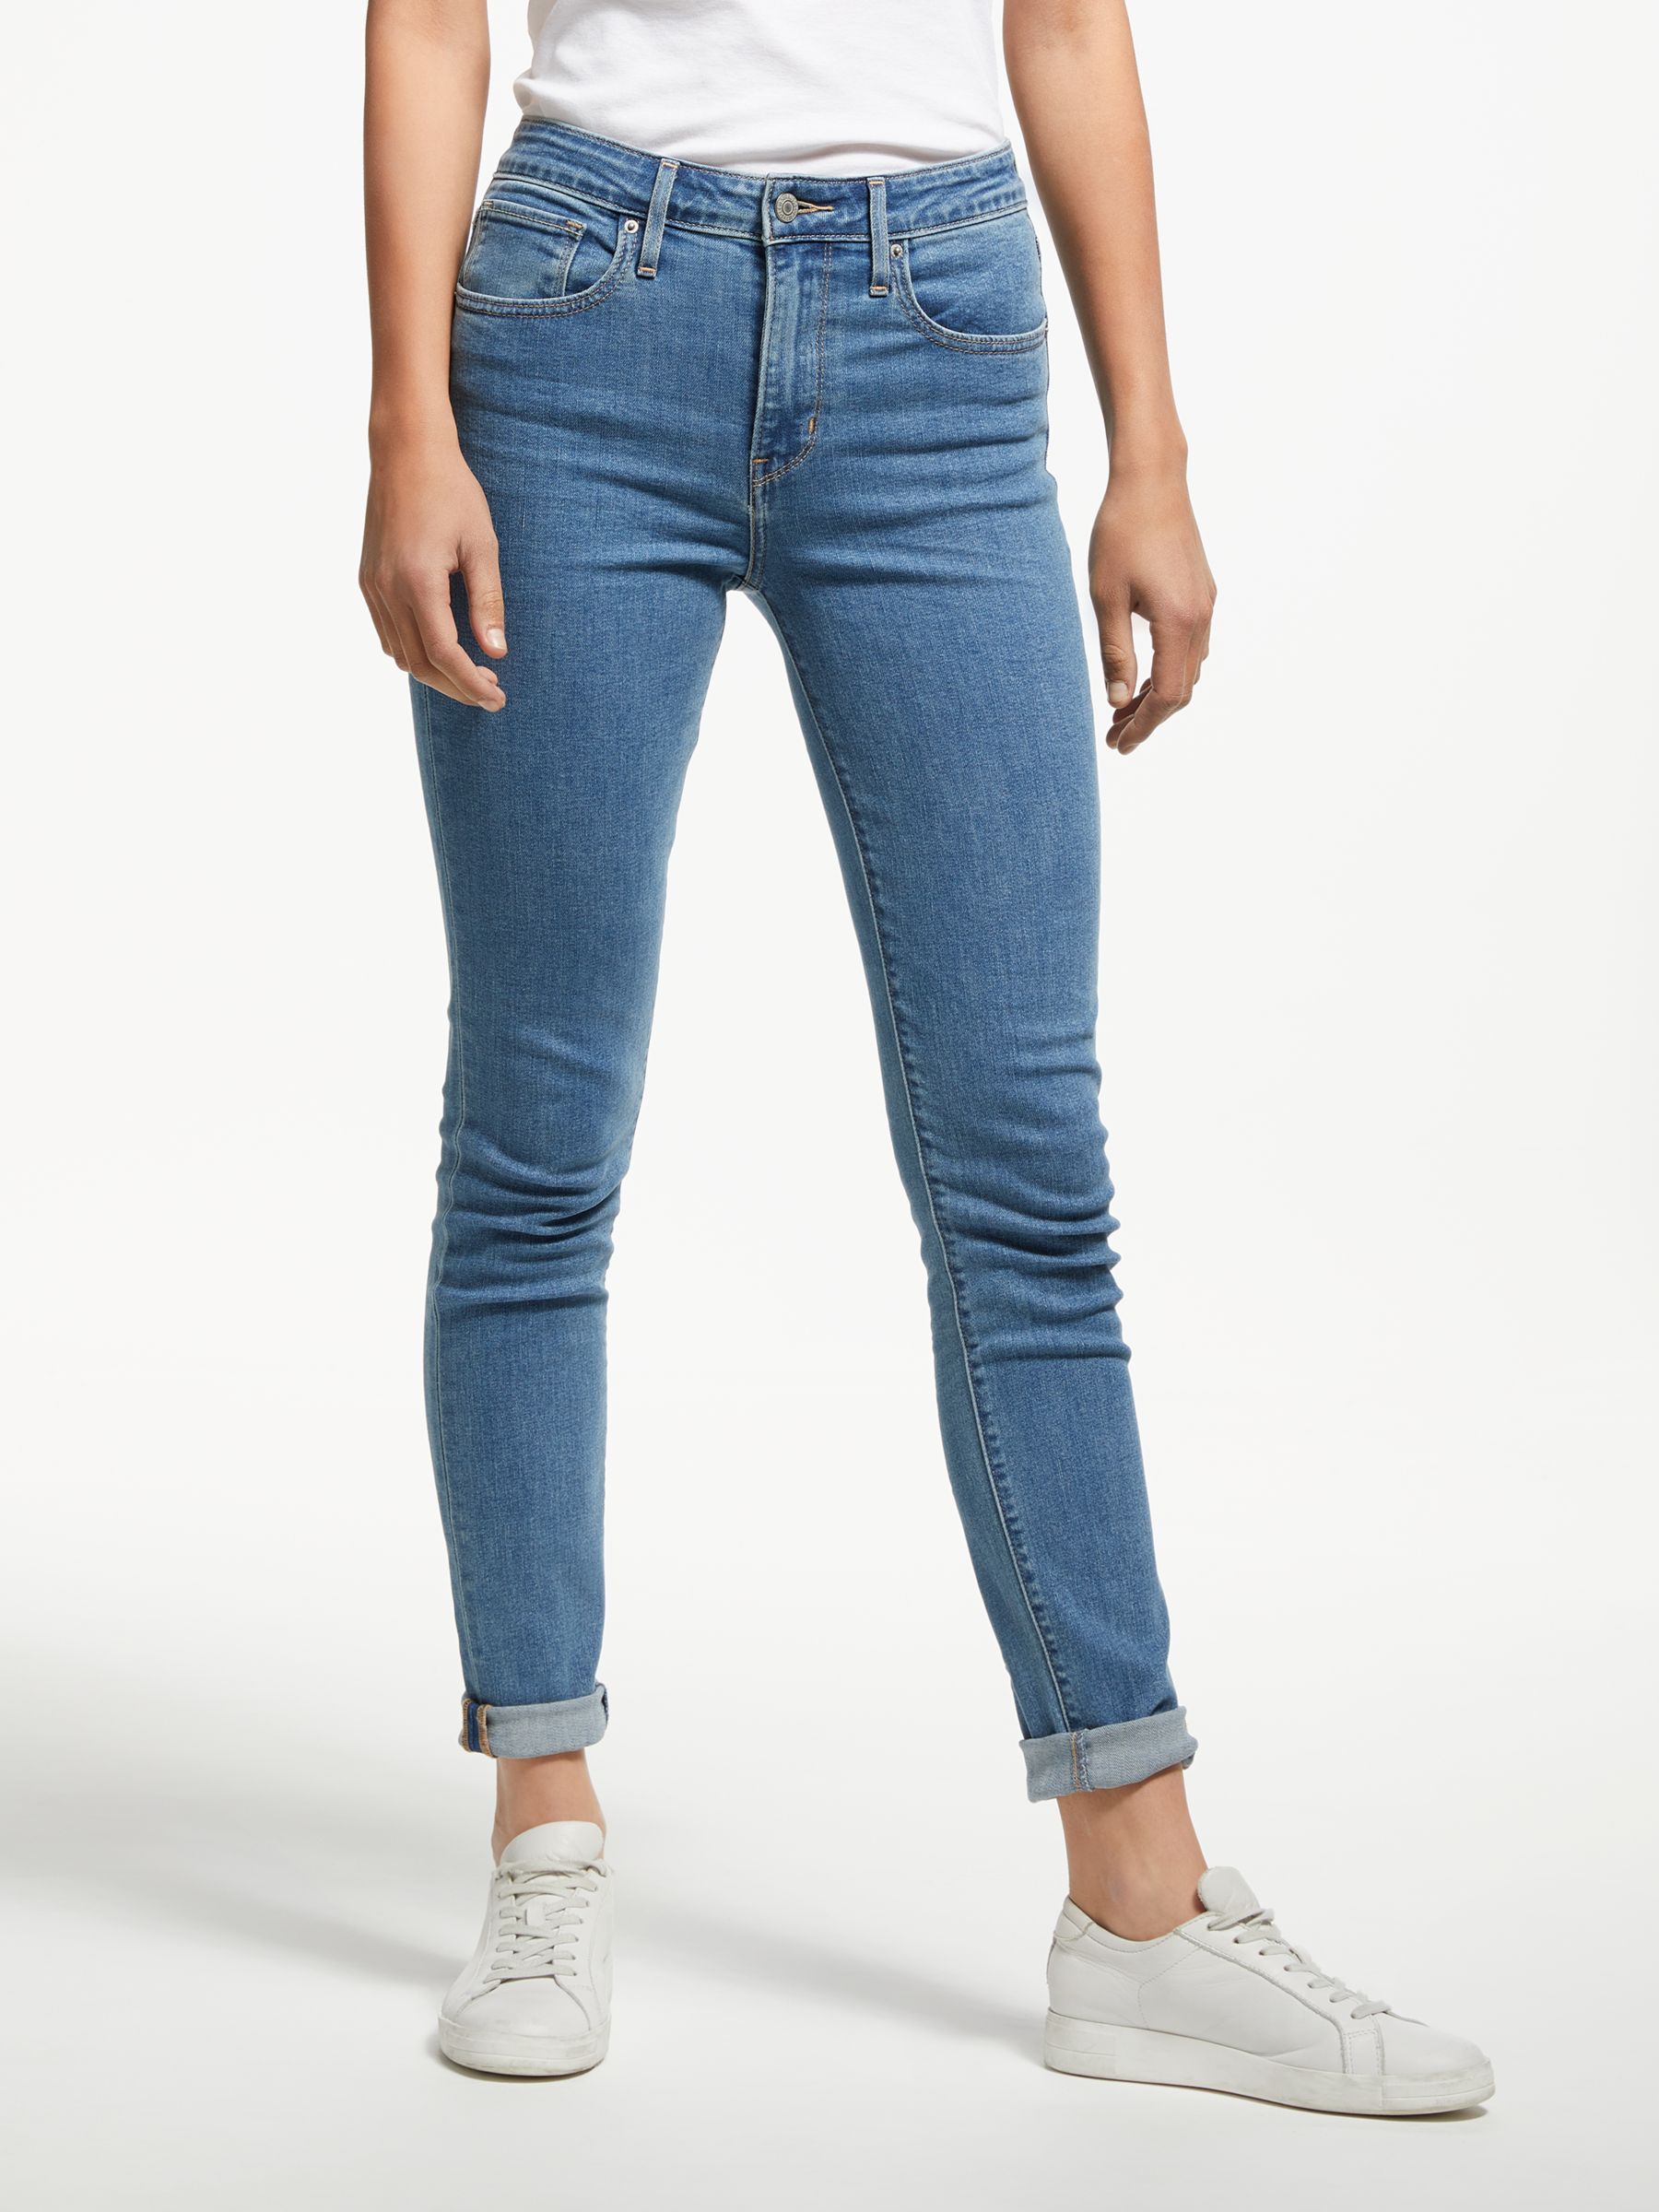 Levis 721 High Rise Skinny Jeans At John Lewis And Partners 